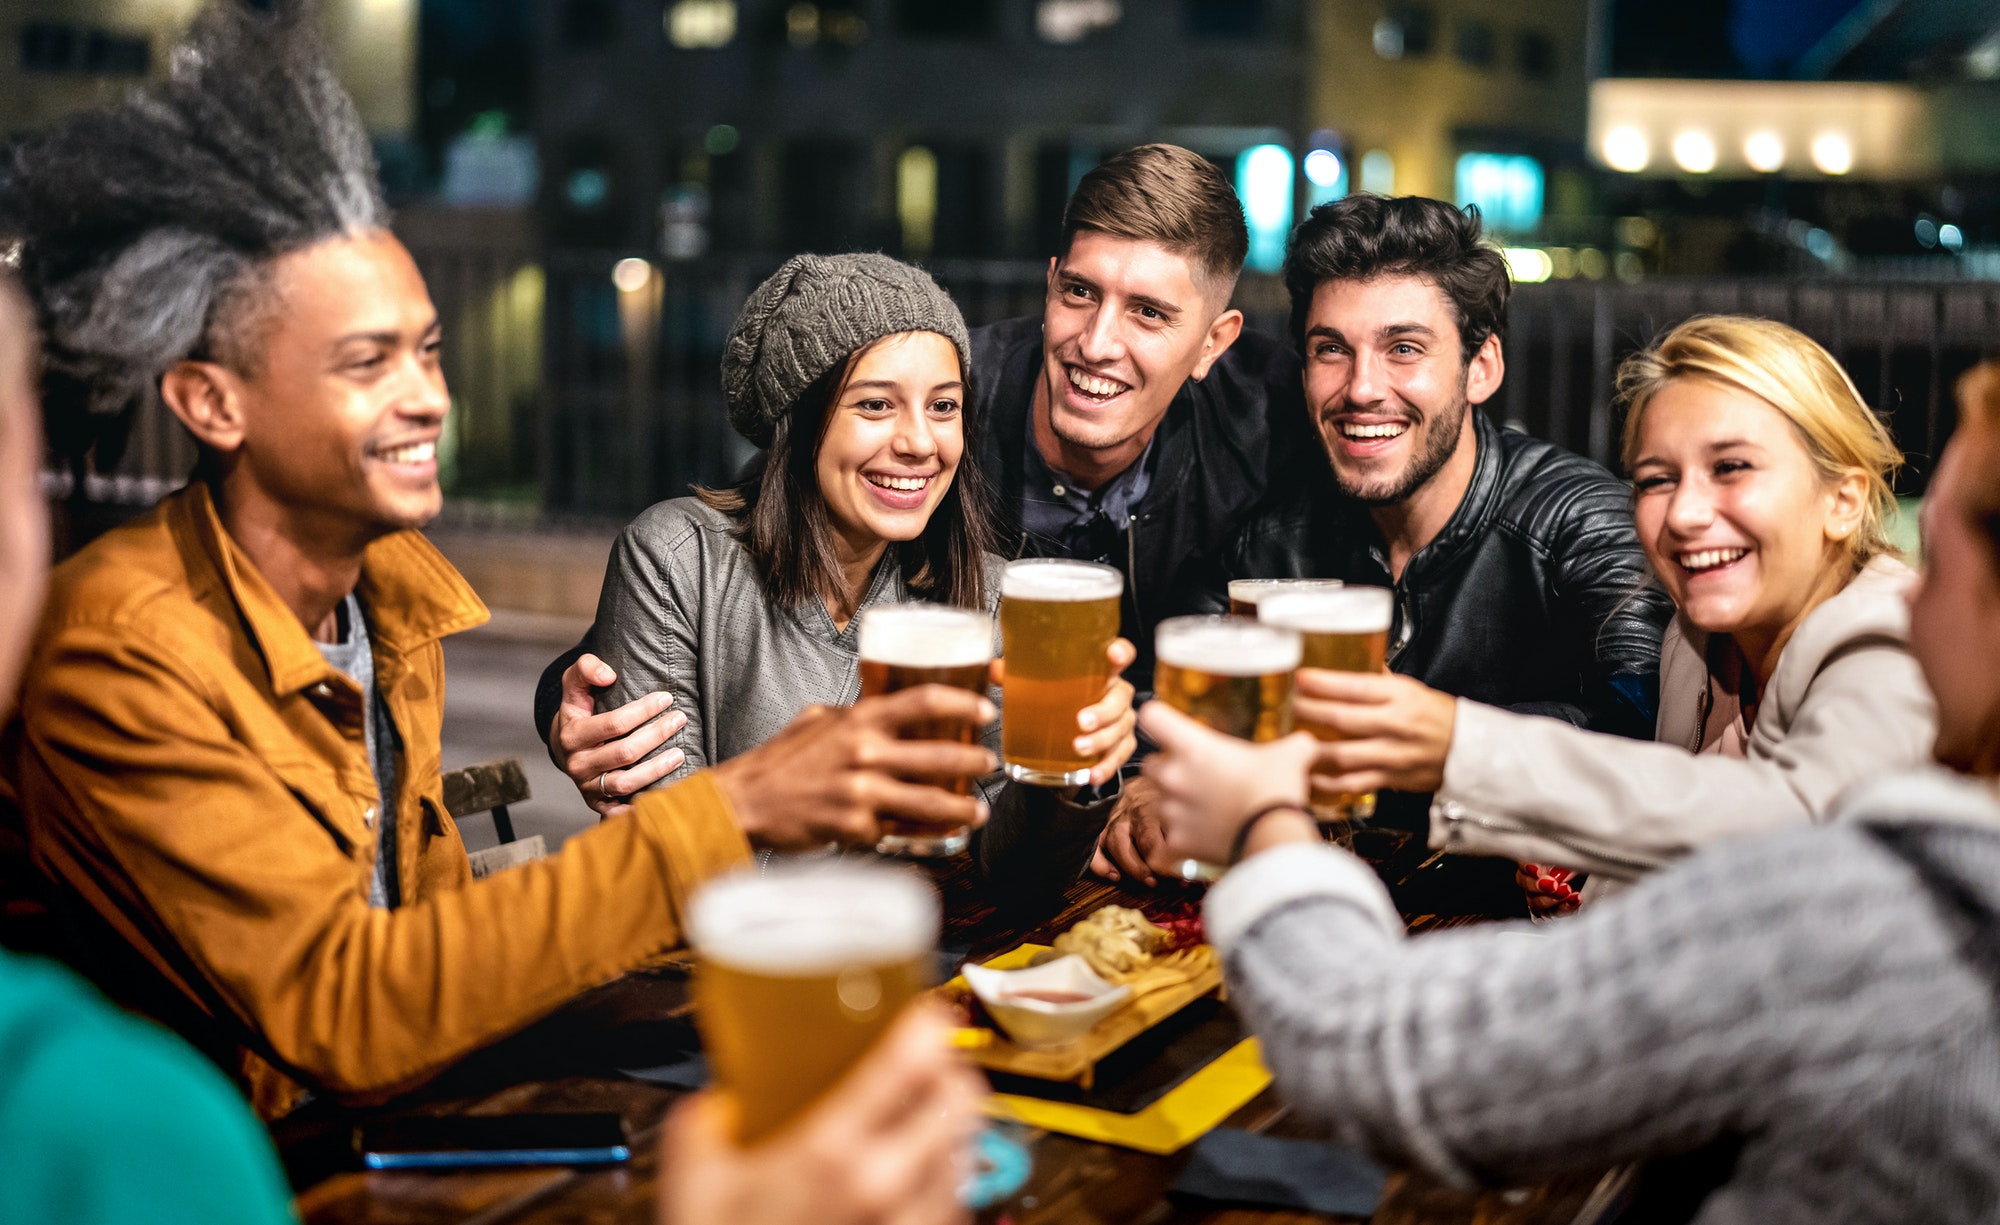 happy-friends-group-drinking-beer-at-brewery-bar-outdoors.jpg